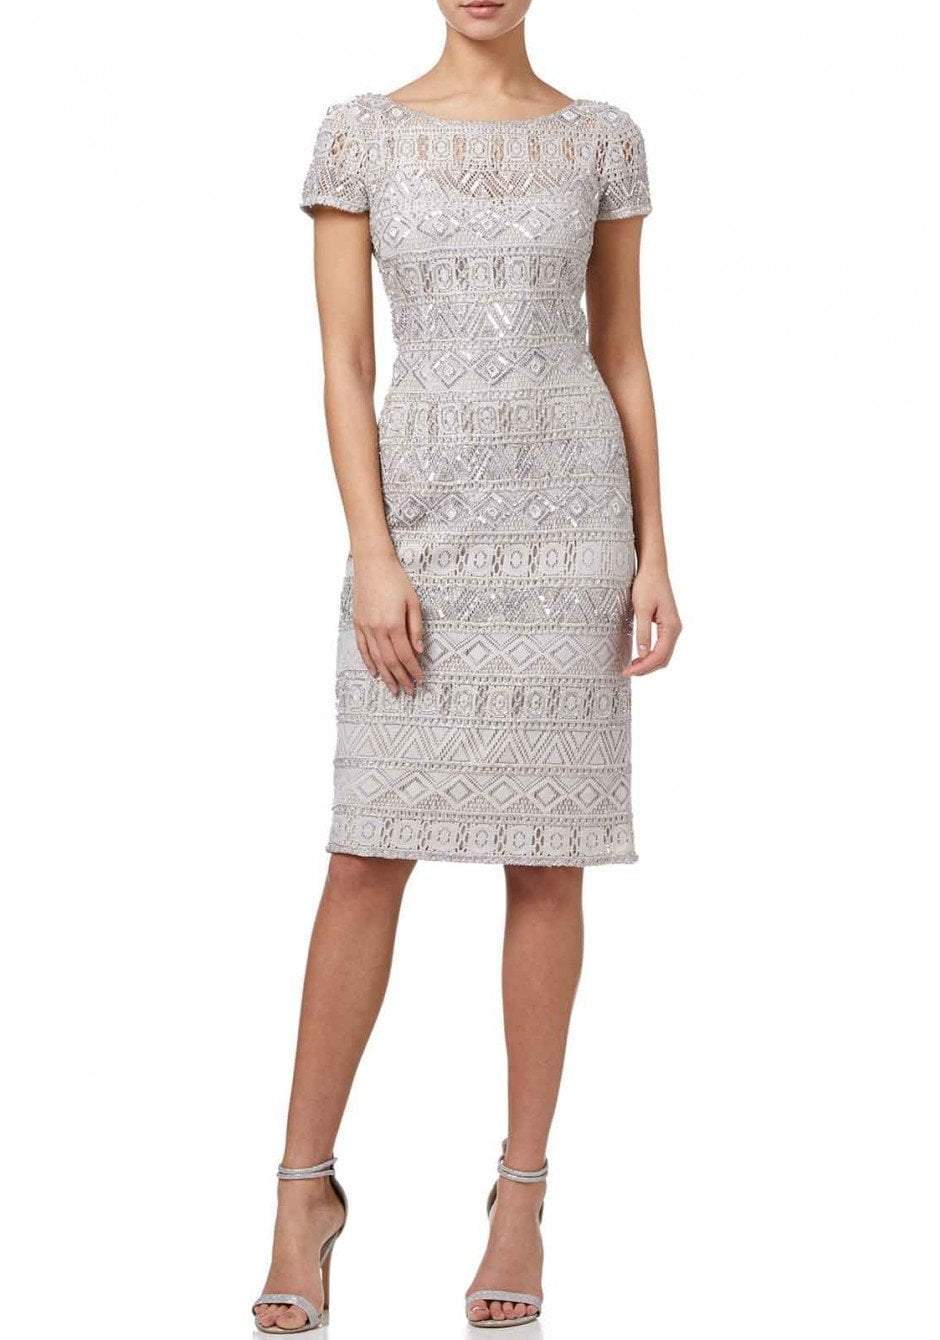 Adrianna Papell - AP1E202476 Ornate Short Sleeve Bateau Fitted Dress In Silver